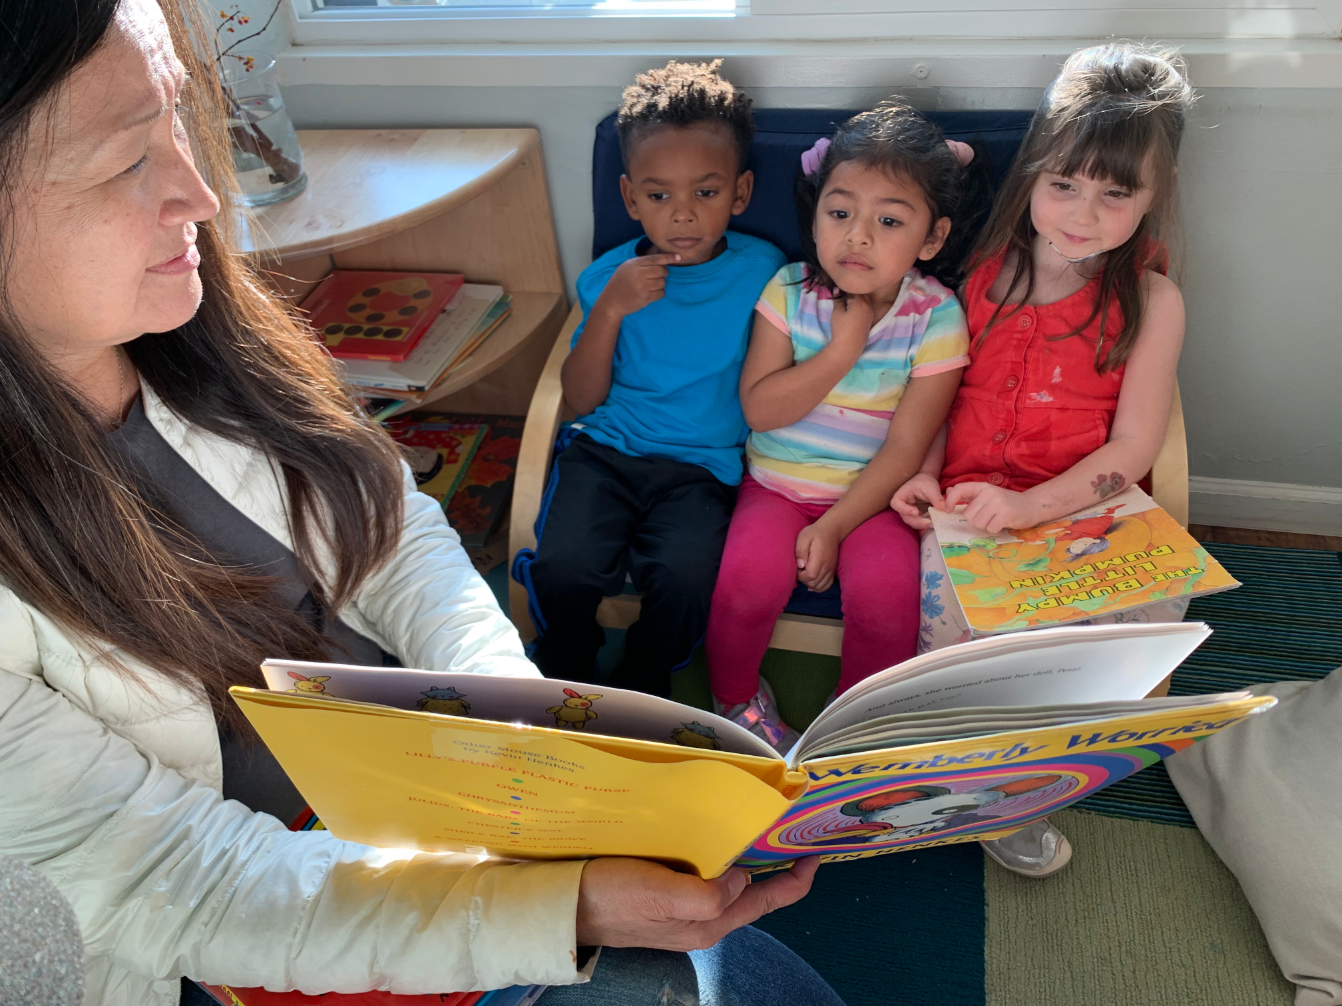 A teacher at All 5 preschool in East Menlo Park reads to children who have chosen book time after they woke up from their naps. All 5 preschool has integration as an explicit part of its mission, reserving half the seats for low-income children and the other half for middle and upper income children. (Deepa Fernandes for LAist)